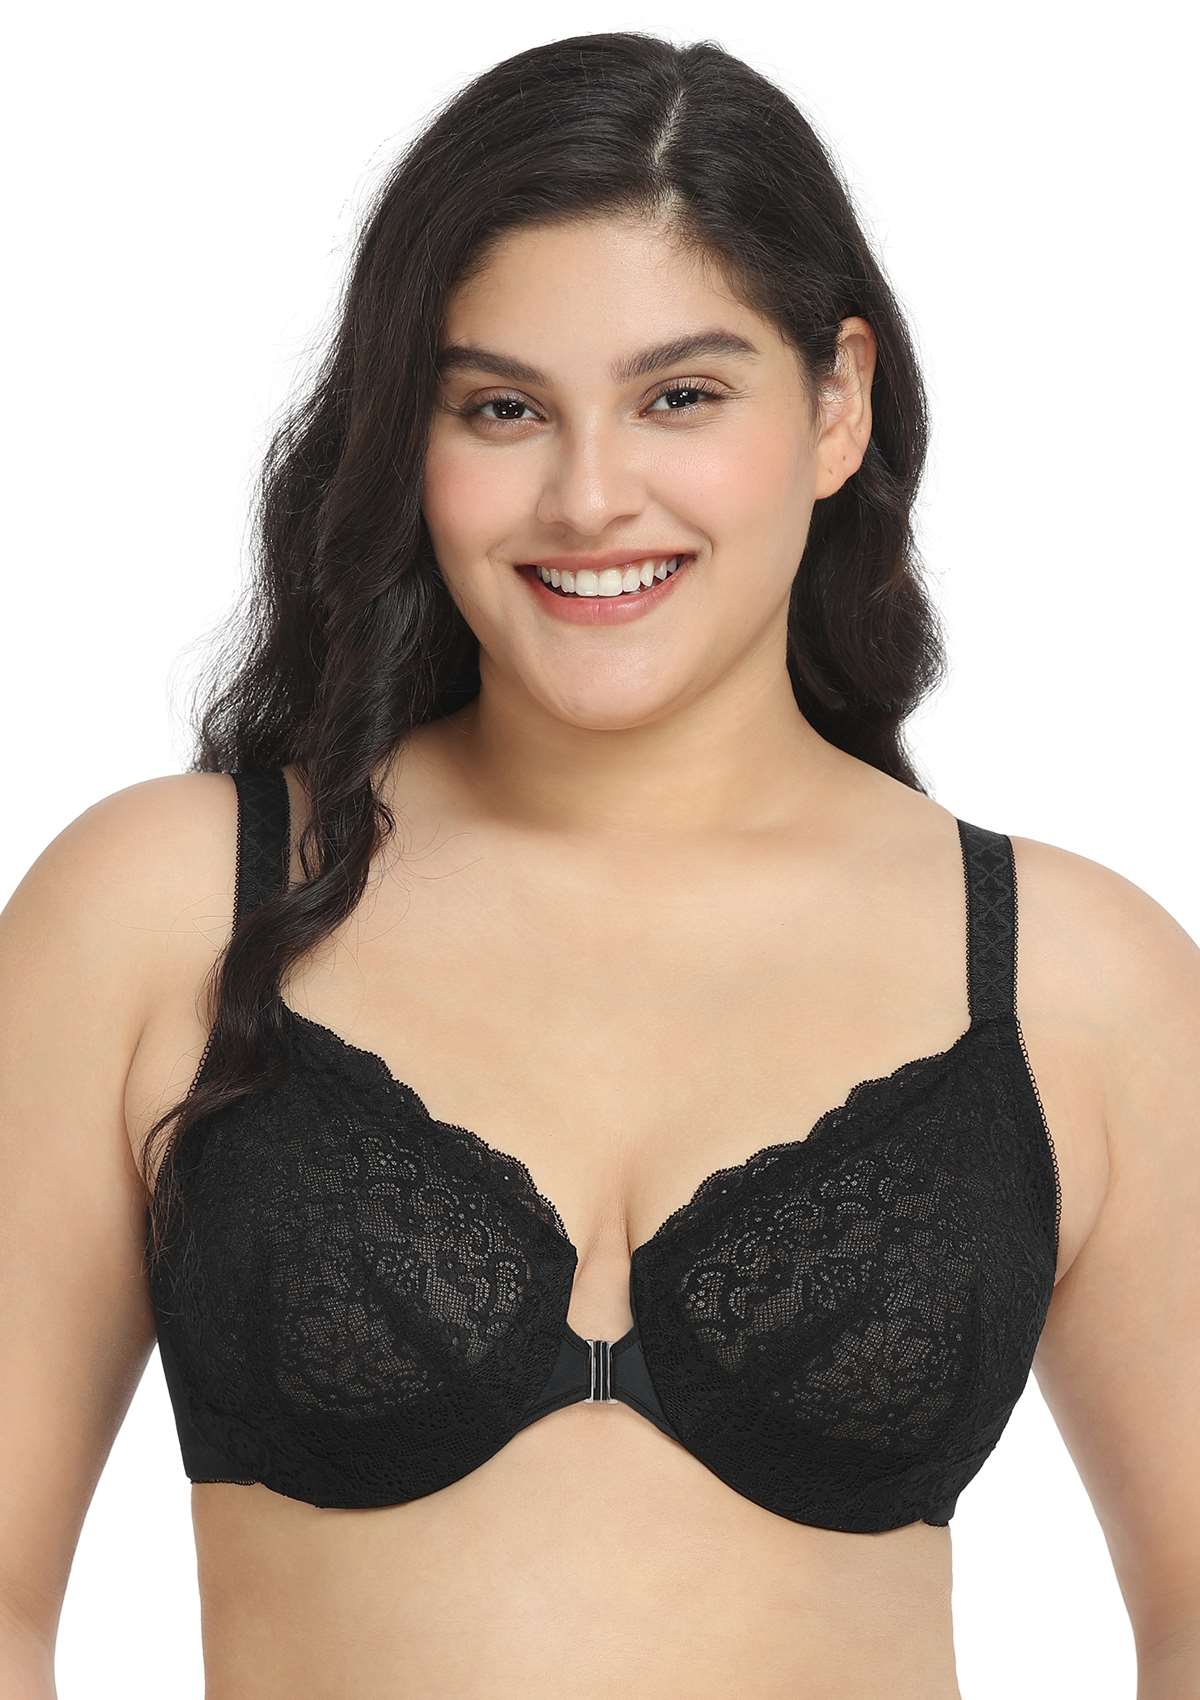 HSIA Nymphaea Front-Close Unlined Retro Floral Lace Back Smoothing Bra - Black / 40 / DDD/F